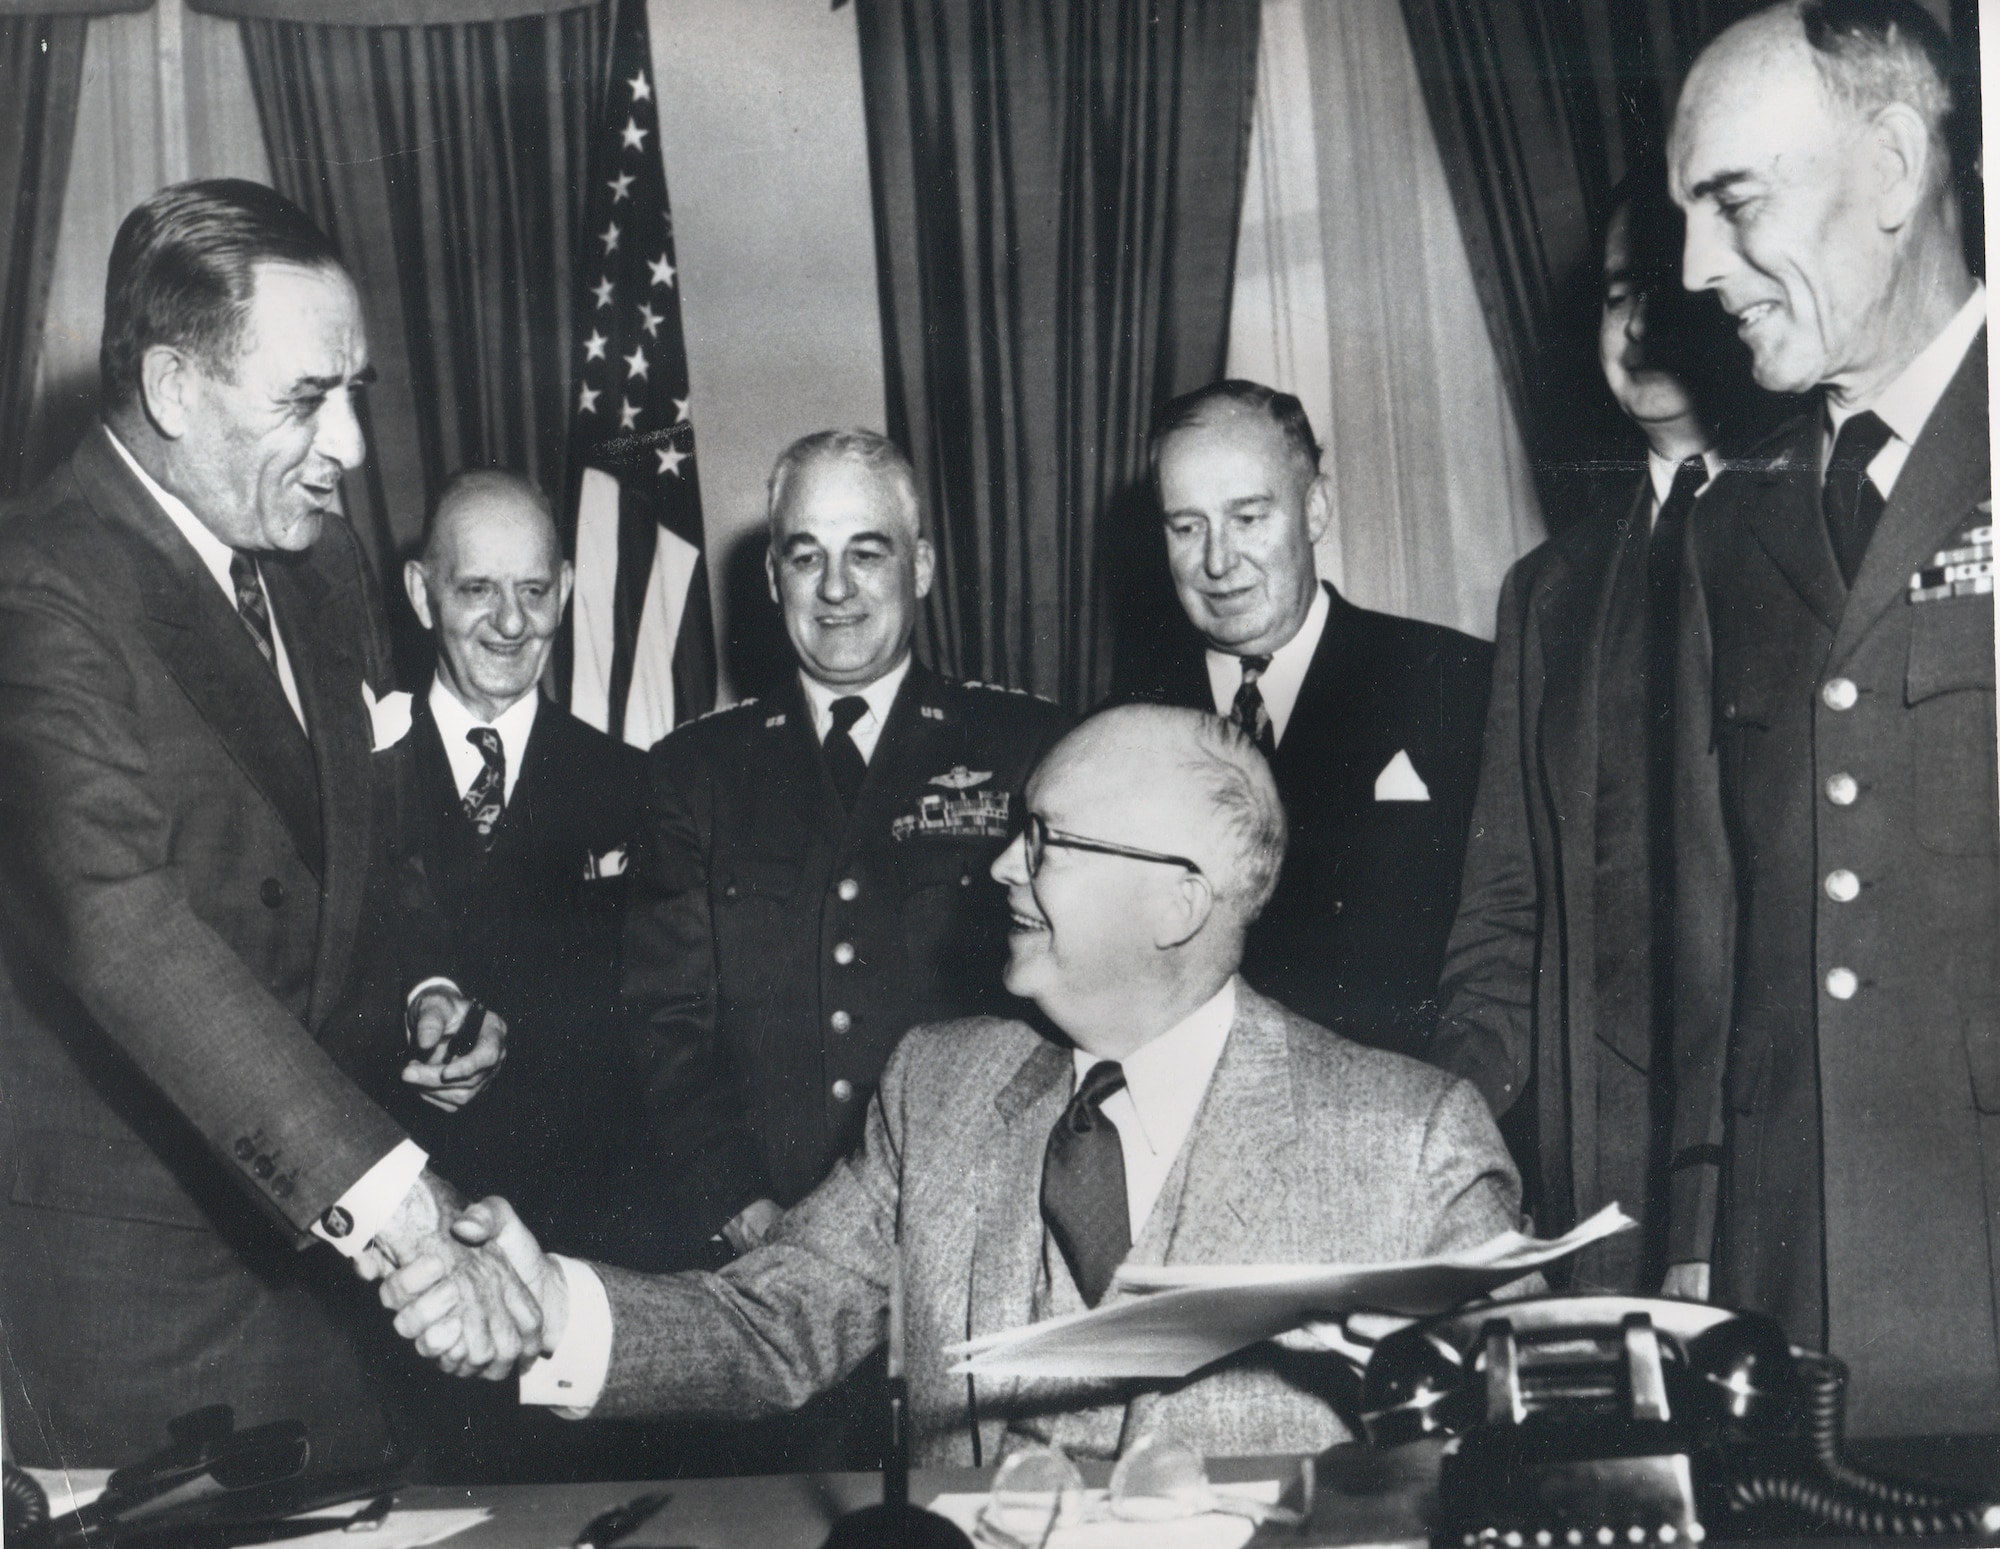 President Dwight D. Eisenhower (seated) shakes hands with Secretary of the Air Force Harold E. Talbott April 1, 1954, after signing legislation authorizing the establishment of the U.S. Air Force Academy. Looking on (from left) are Congressman Karl Vinton, of Georgia; Gen. Nathan F. Twining, Air Force chief of staff; Congressman Dewey Short, chairman of the House Armed Services Committee; James H. Douglas, undersecretary of the Air Force, and Lt. Gen. Hubert R. Harmon, special assistant for the Academy. (U.S. Air Force Academy McDermott Library Archives)